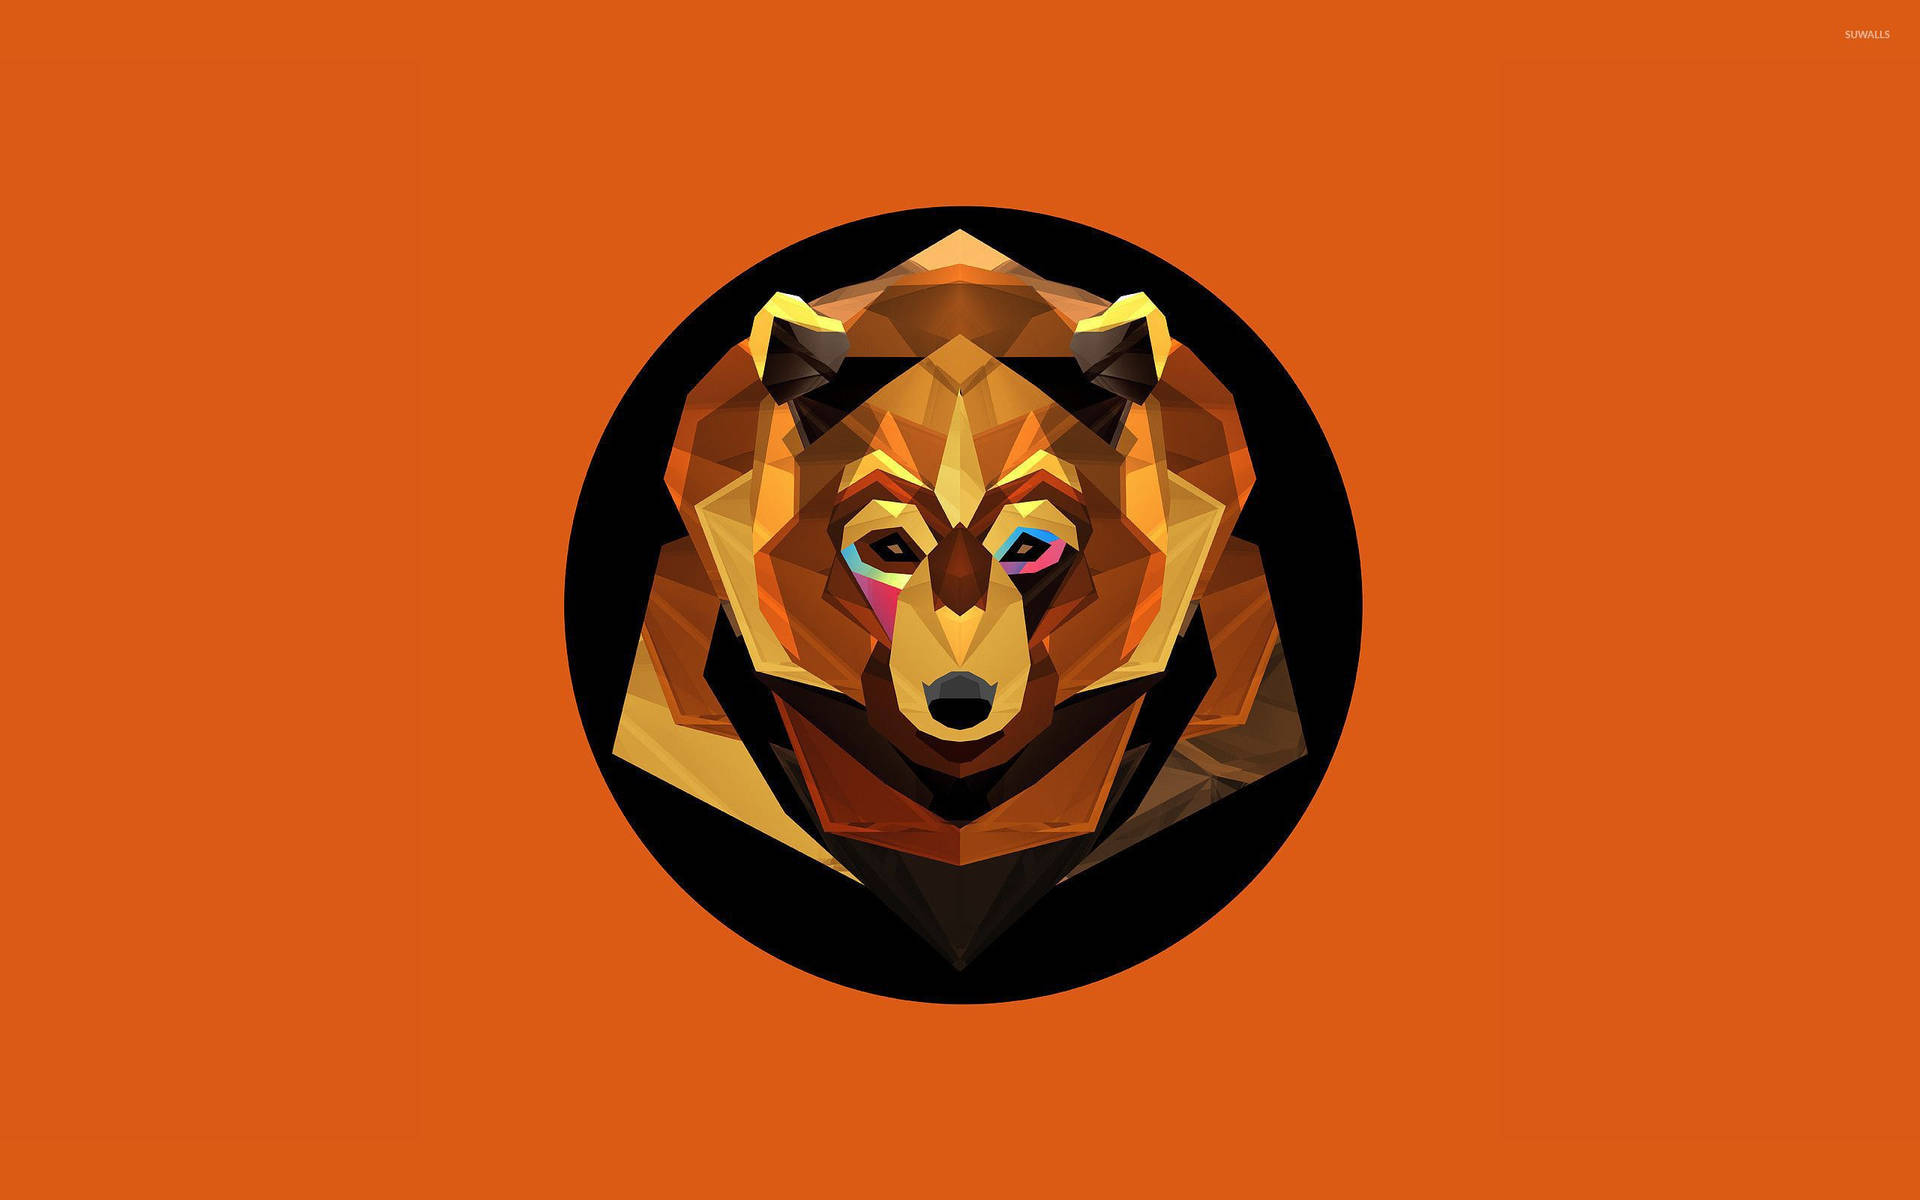 A creative and colourful Polygon Bear, ready to bring out your wild side! Wallpaper